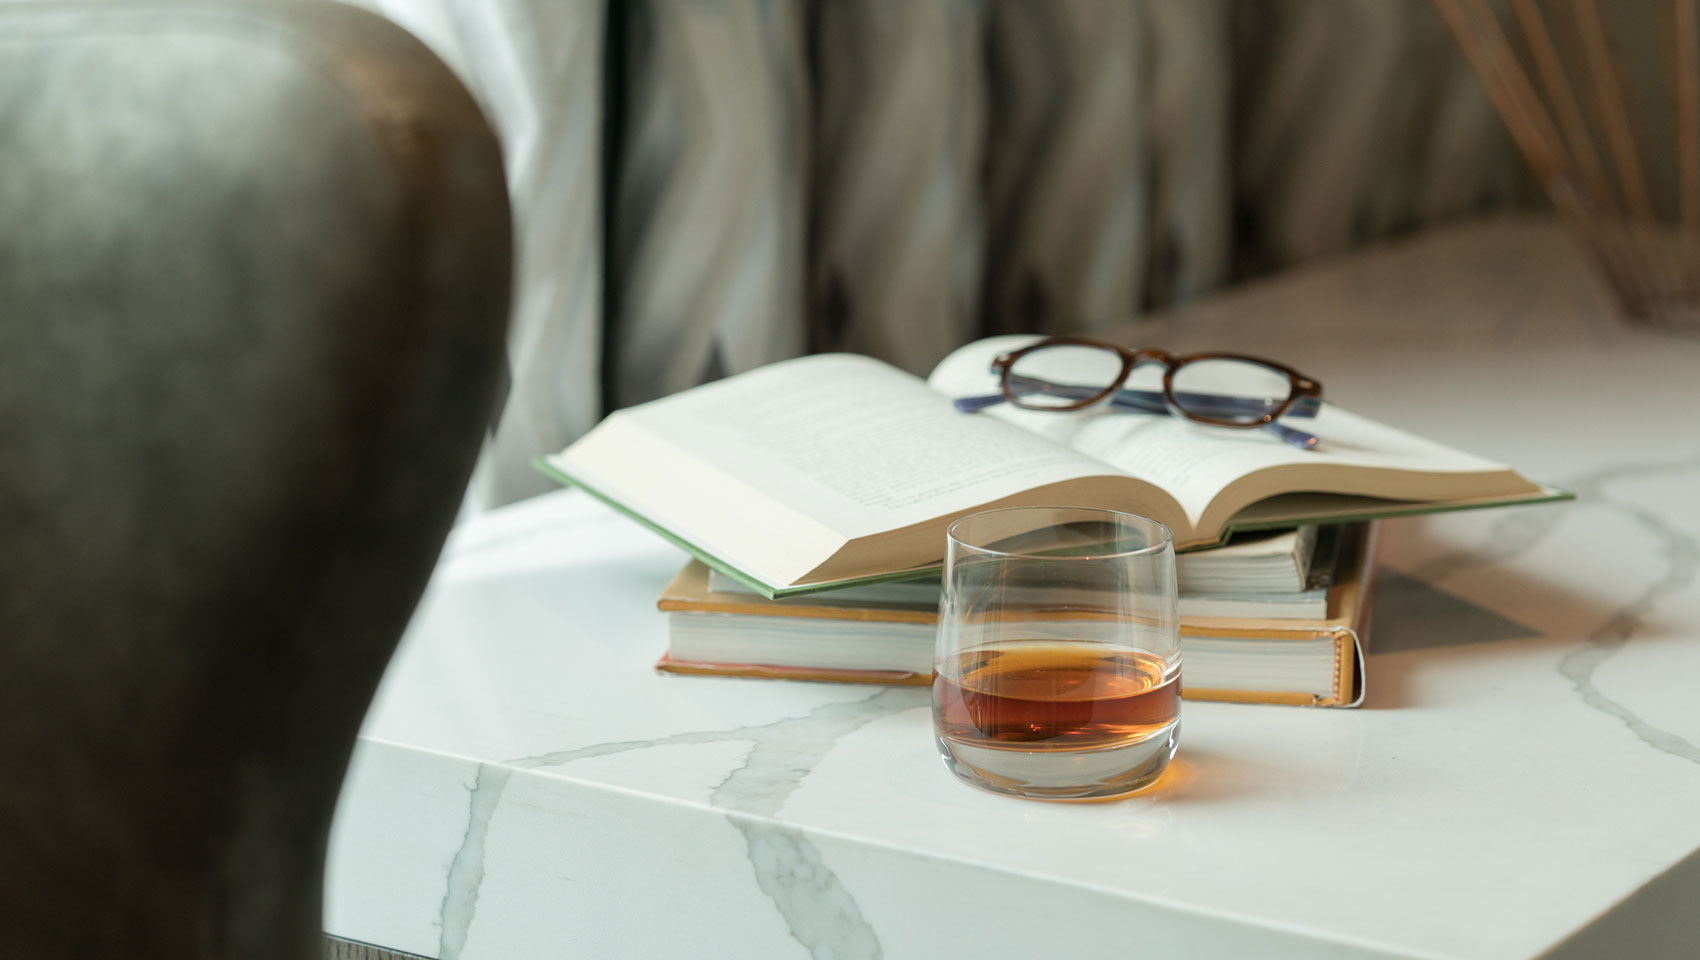 whiskey and glasses on a table